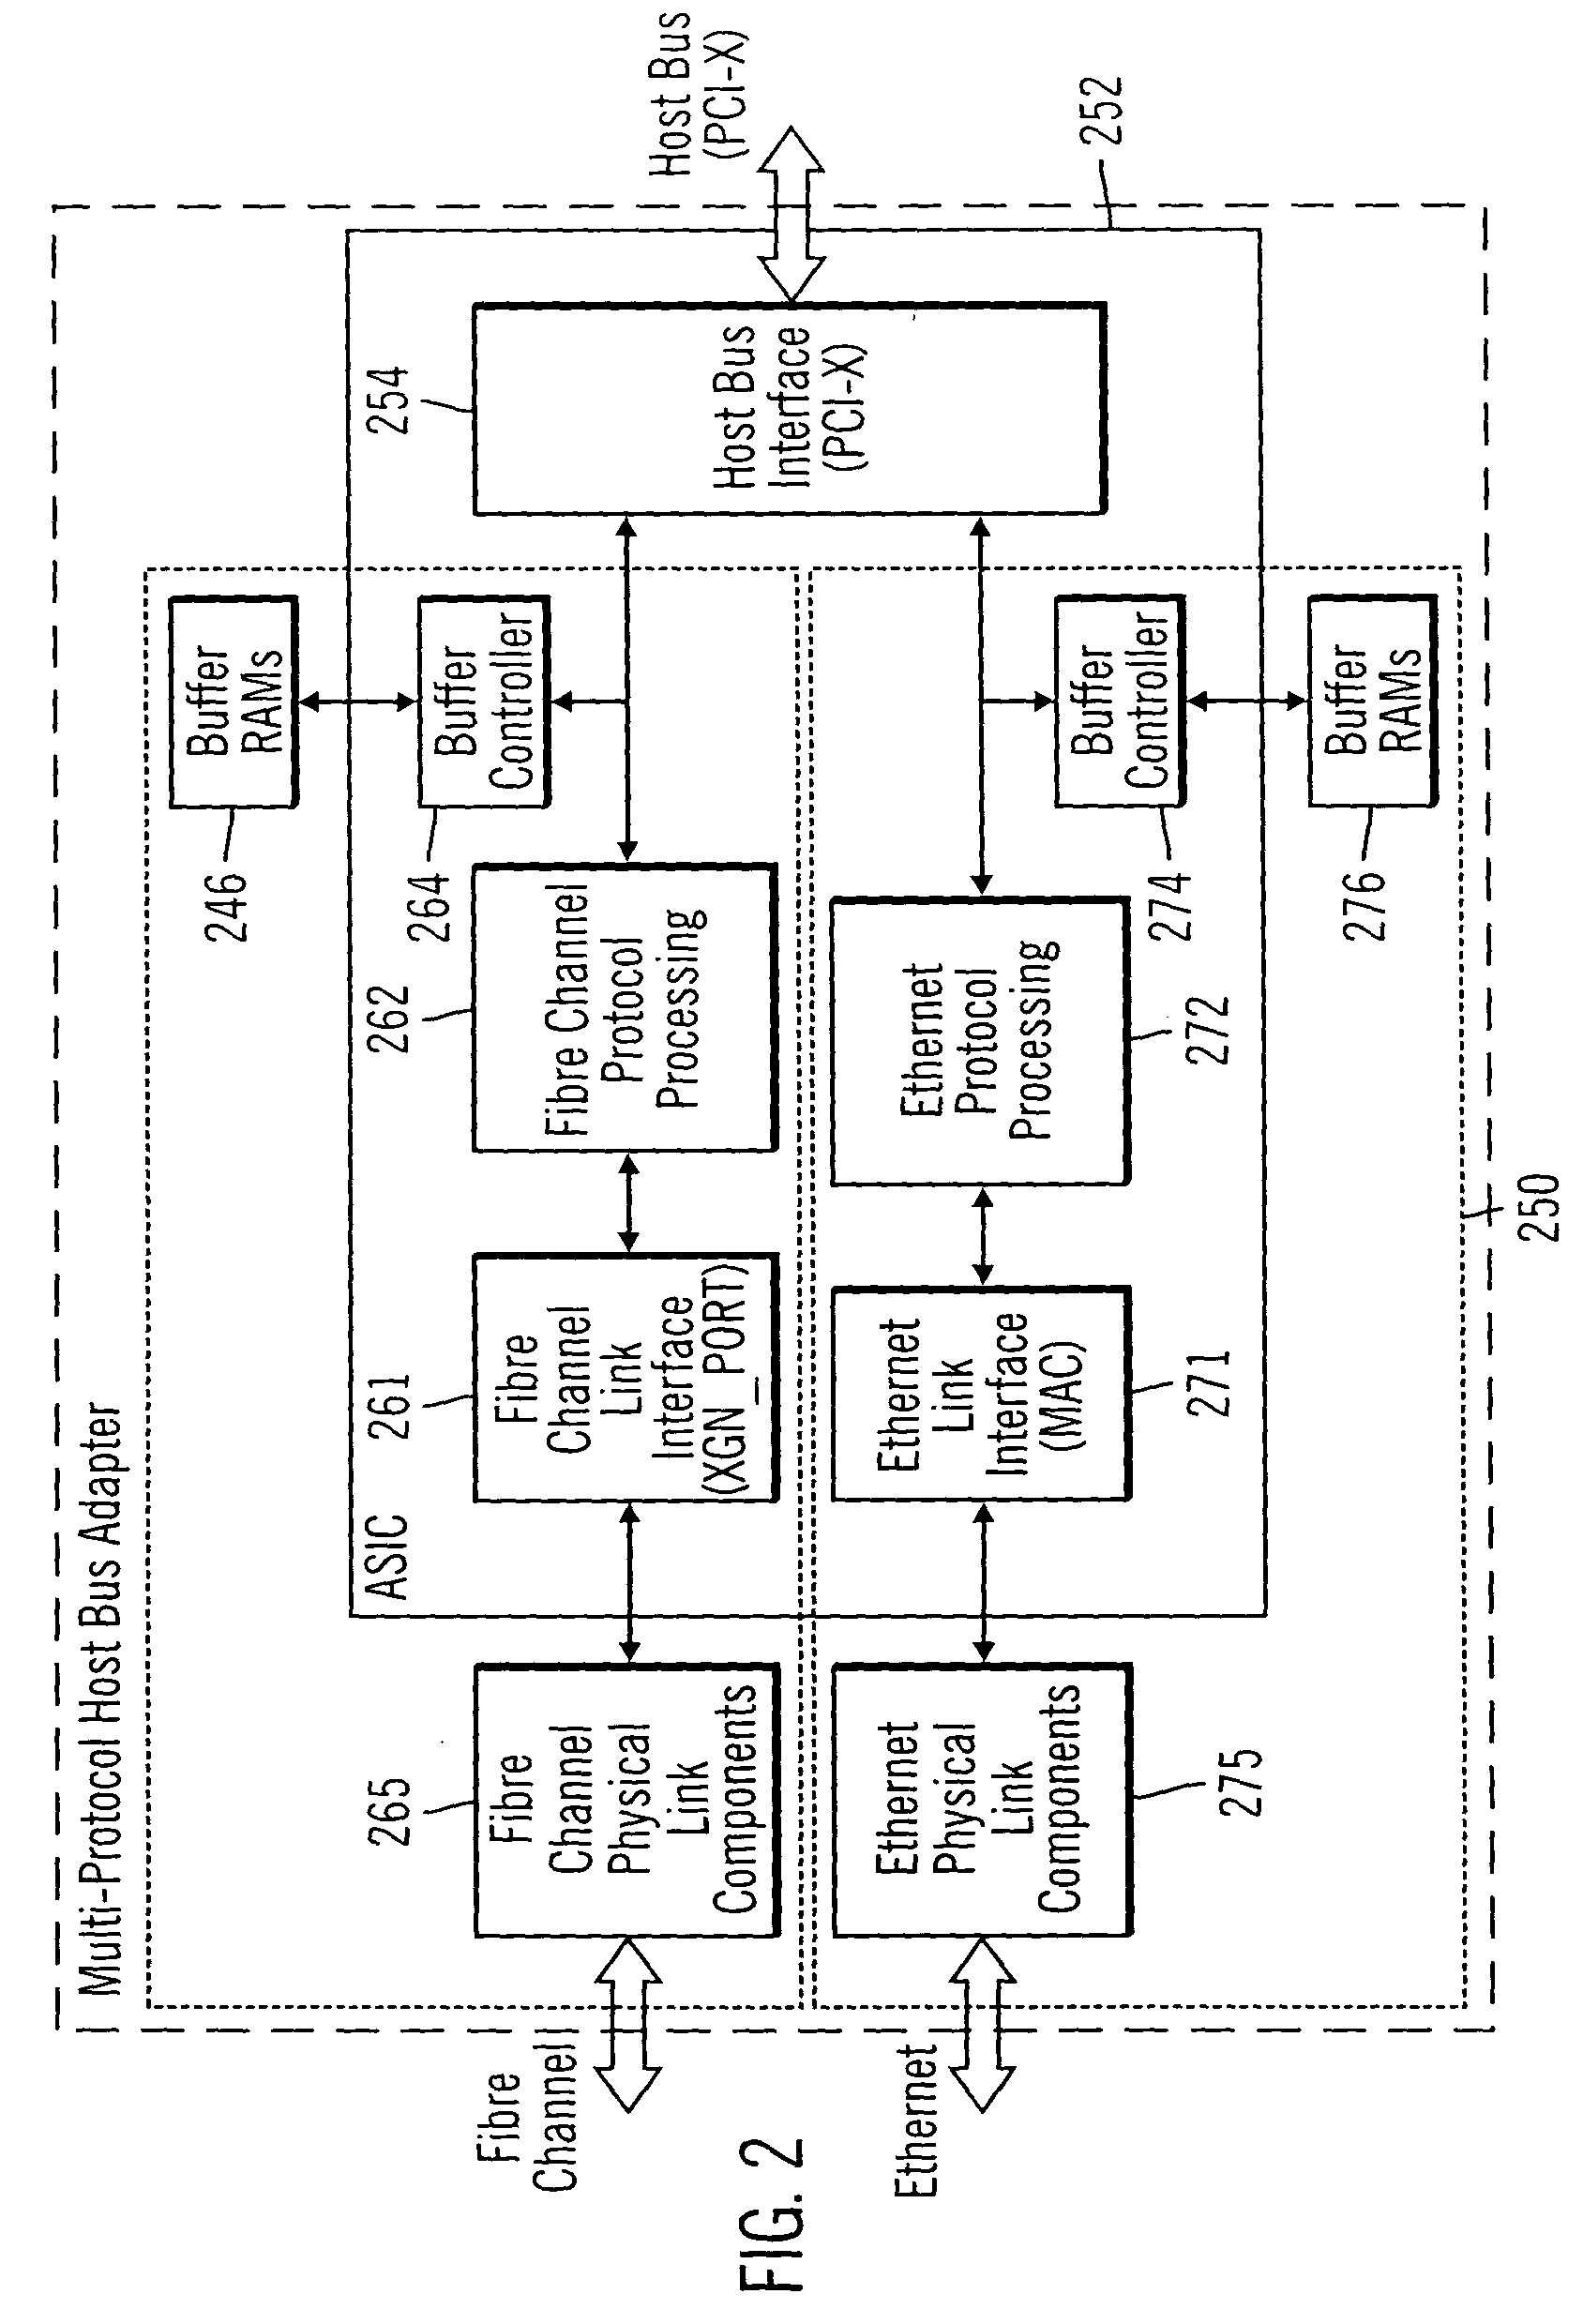 Integrated network interface supporting multiple data transfer protocols